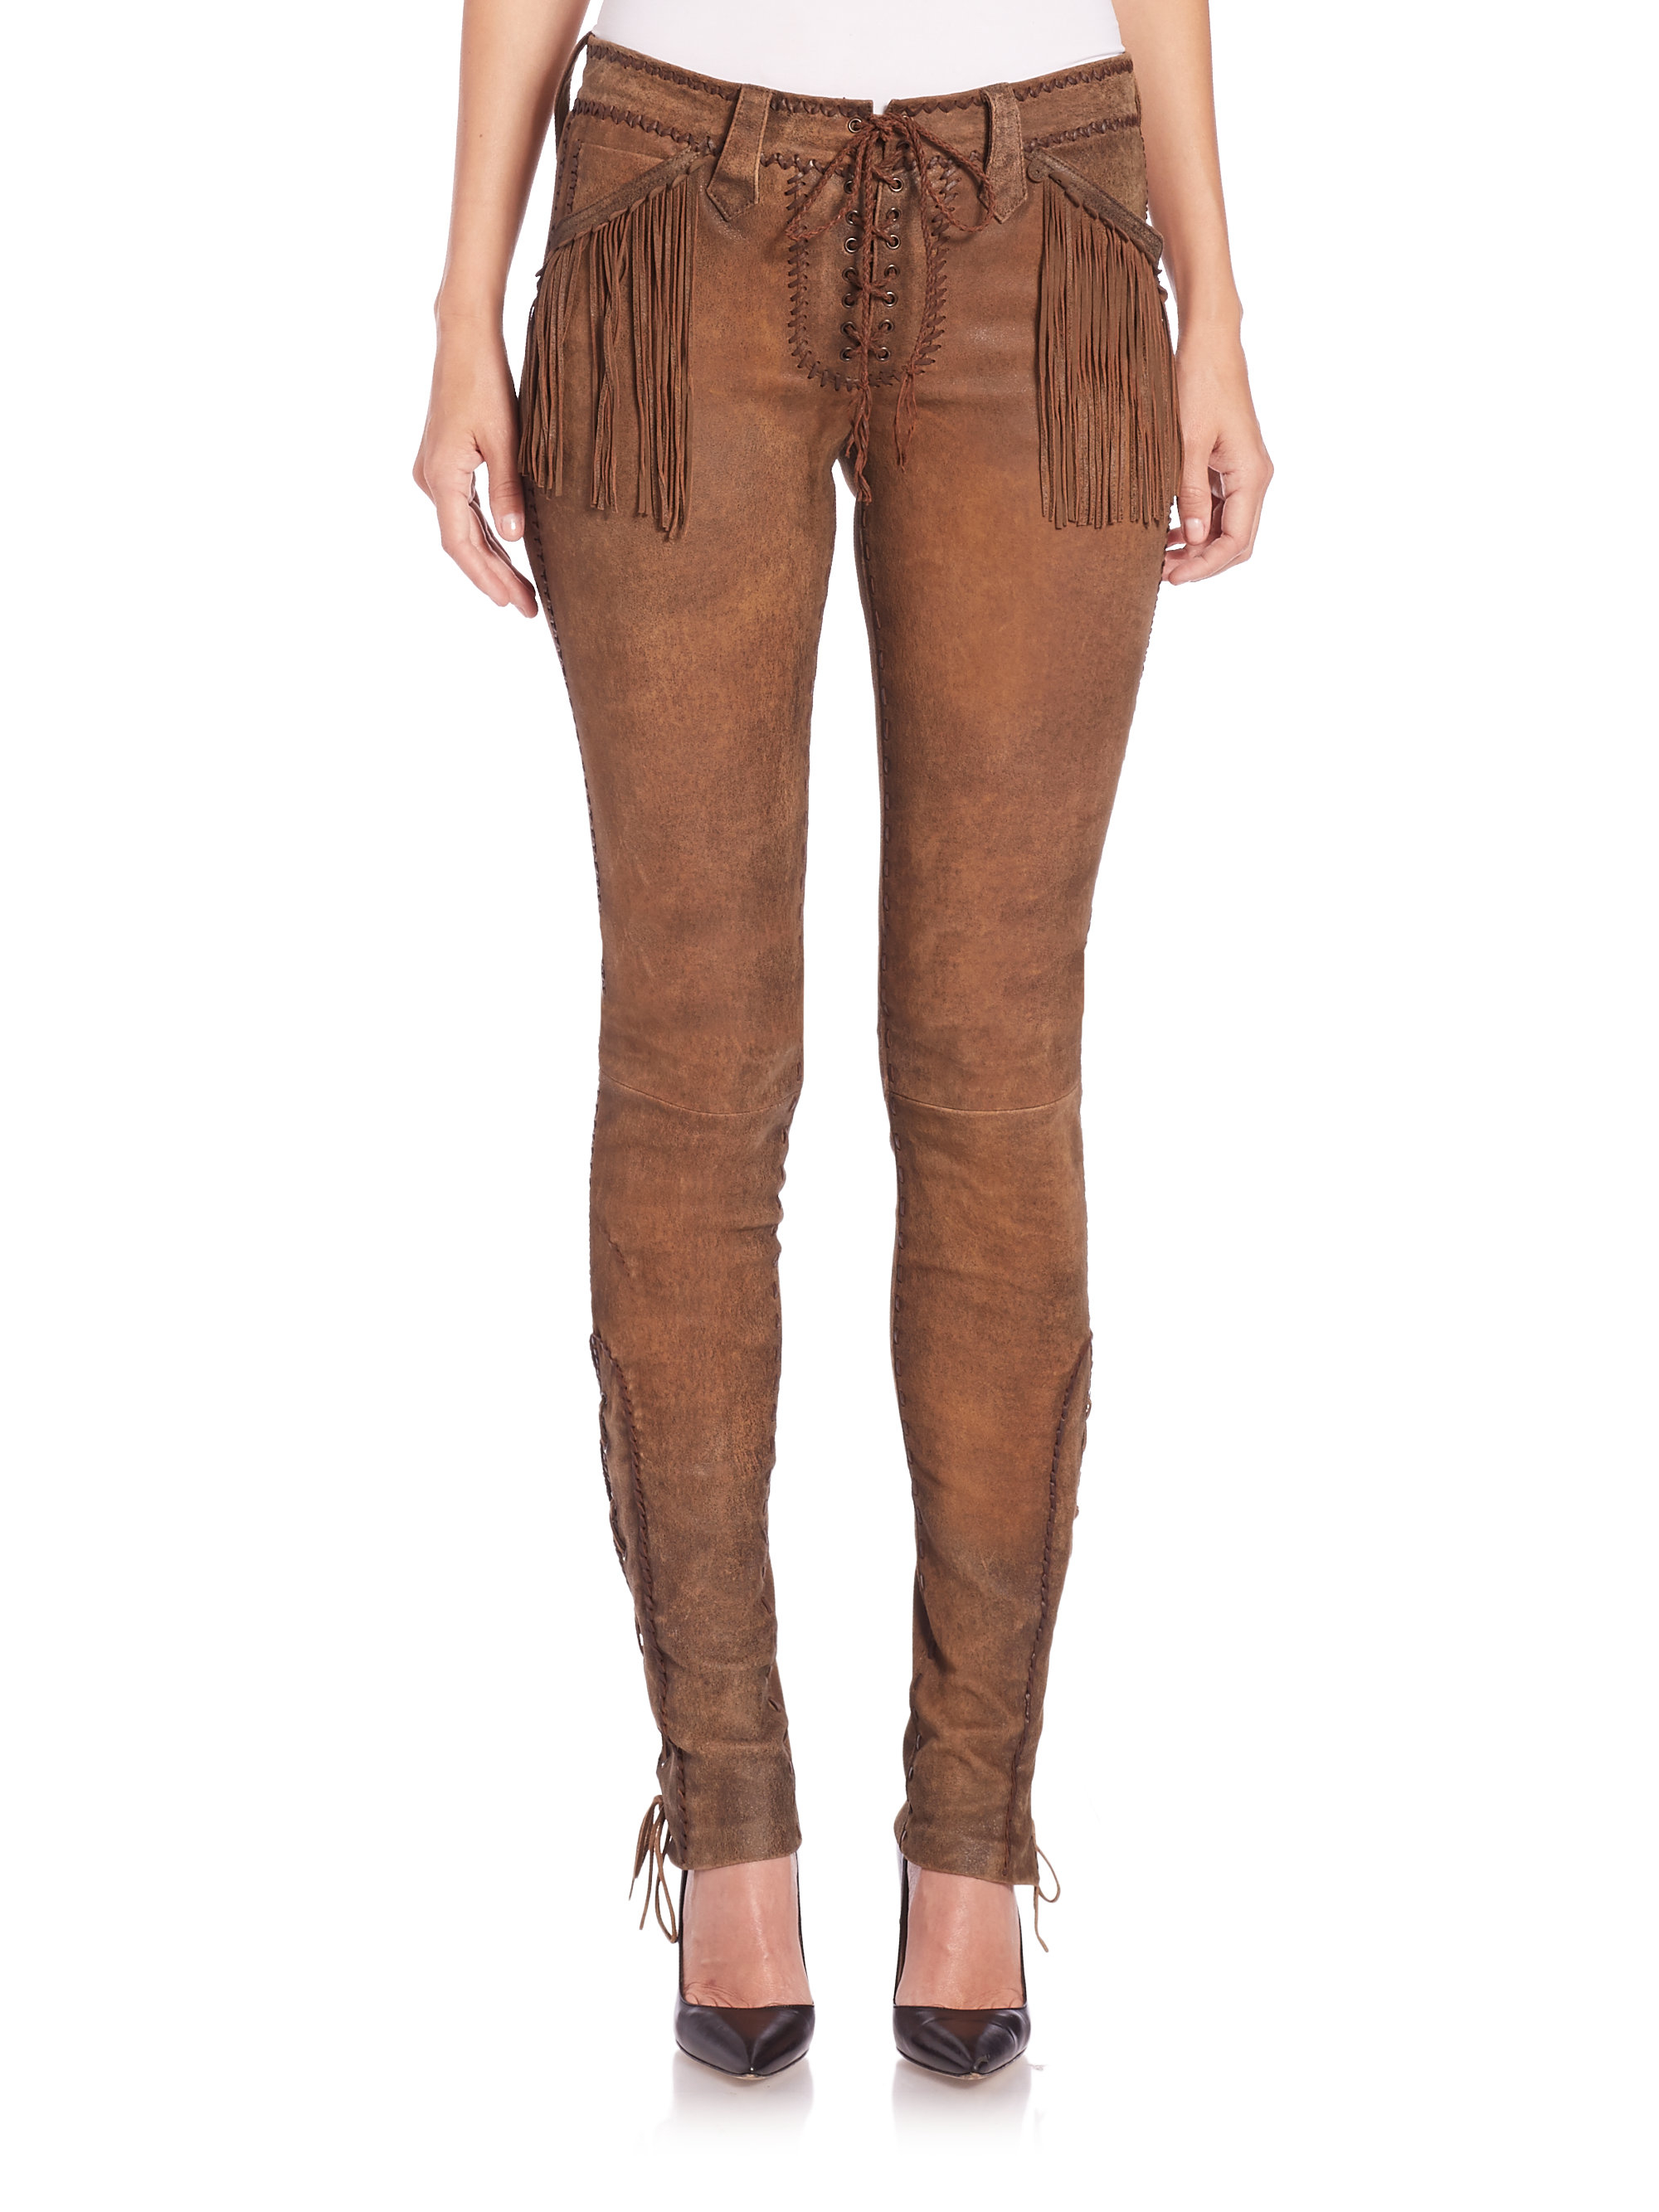 Polo Ralph Lauren Fringed Stretch Leather Pants in Brown | Lyst